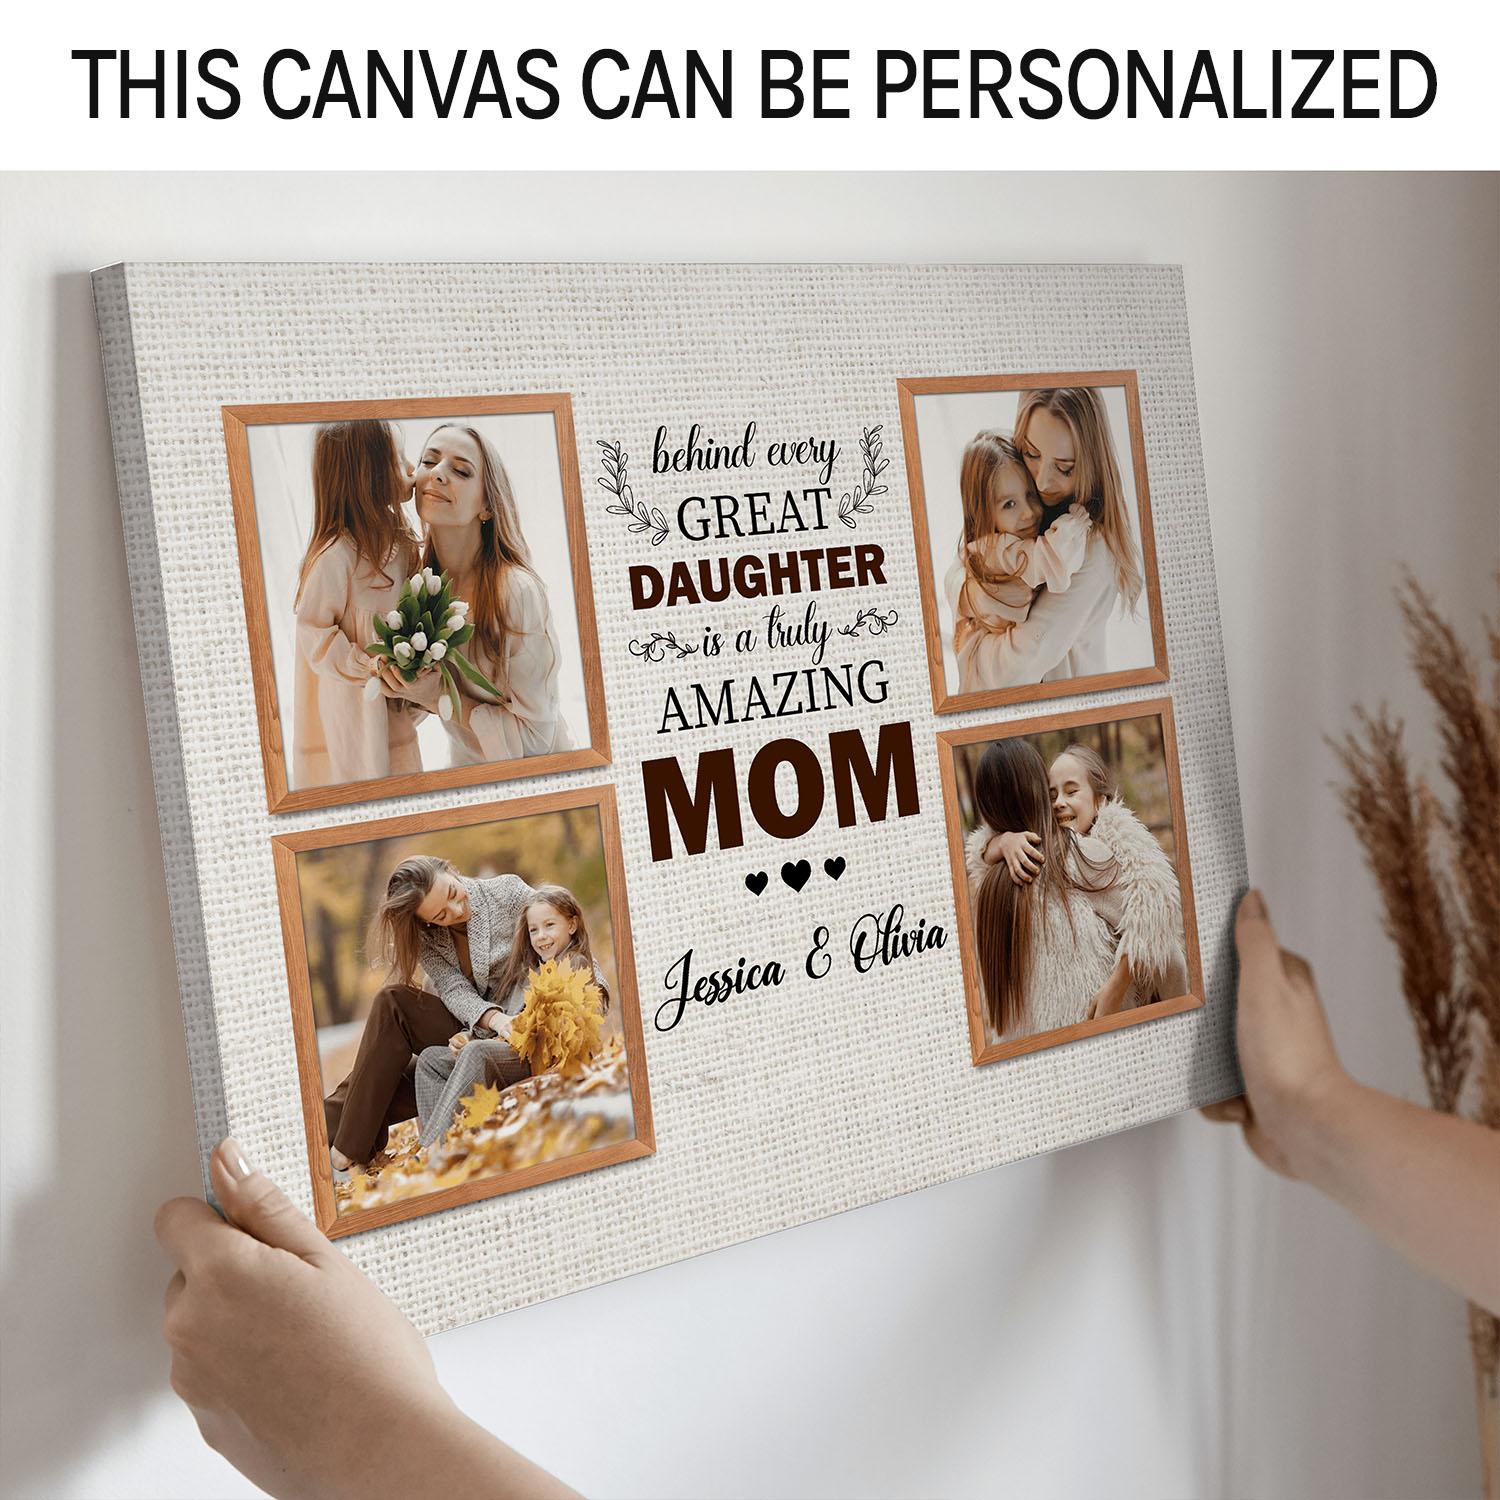 Personalized Mother's day gift for mom - Behind every great daughter is a truly amazing mom - custom Canvas print - MyMindfulGifts